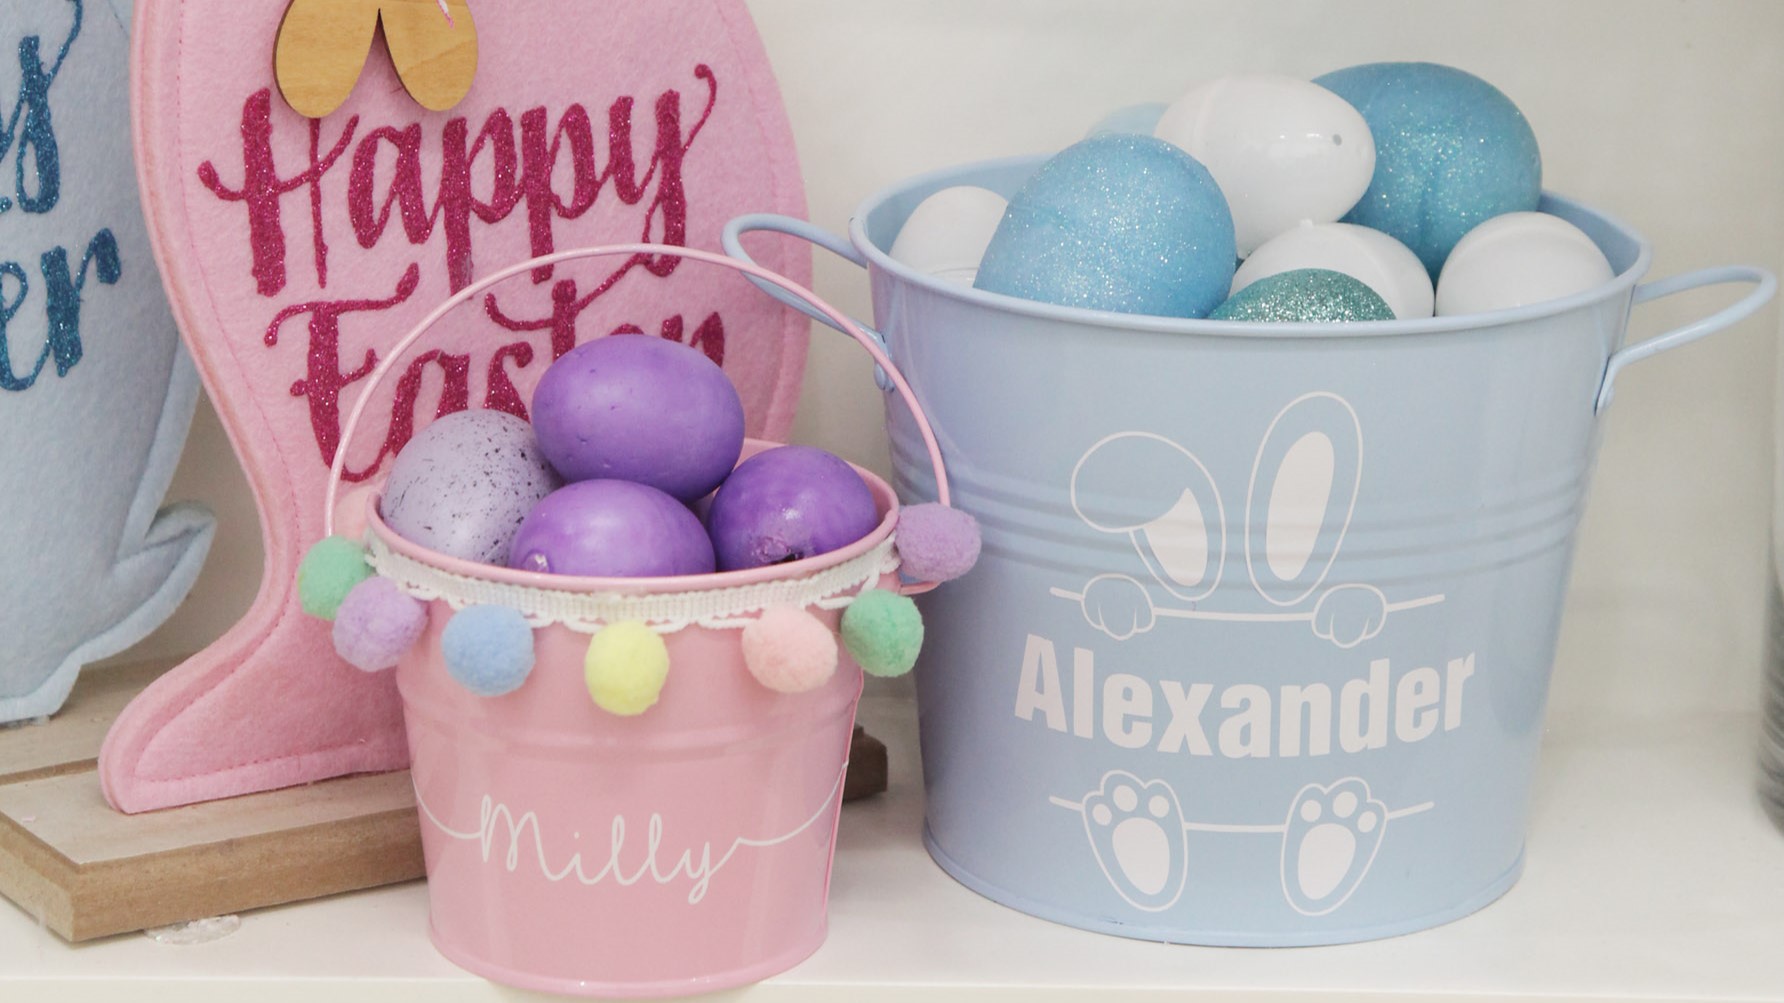 Spread the Easter Love with Beautiful Easter Gifts and Keepsakes